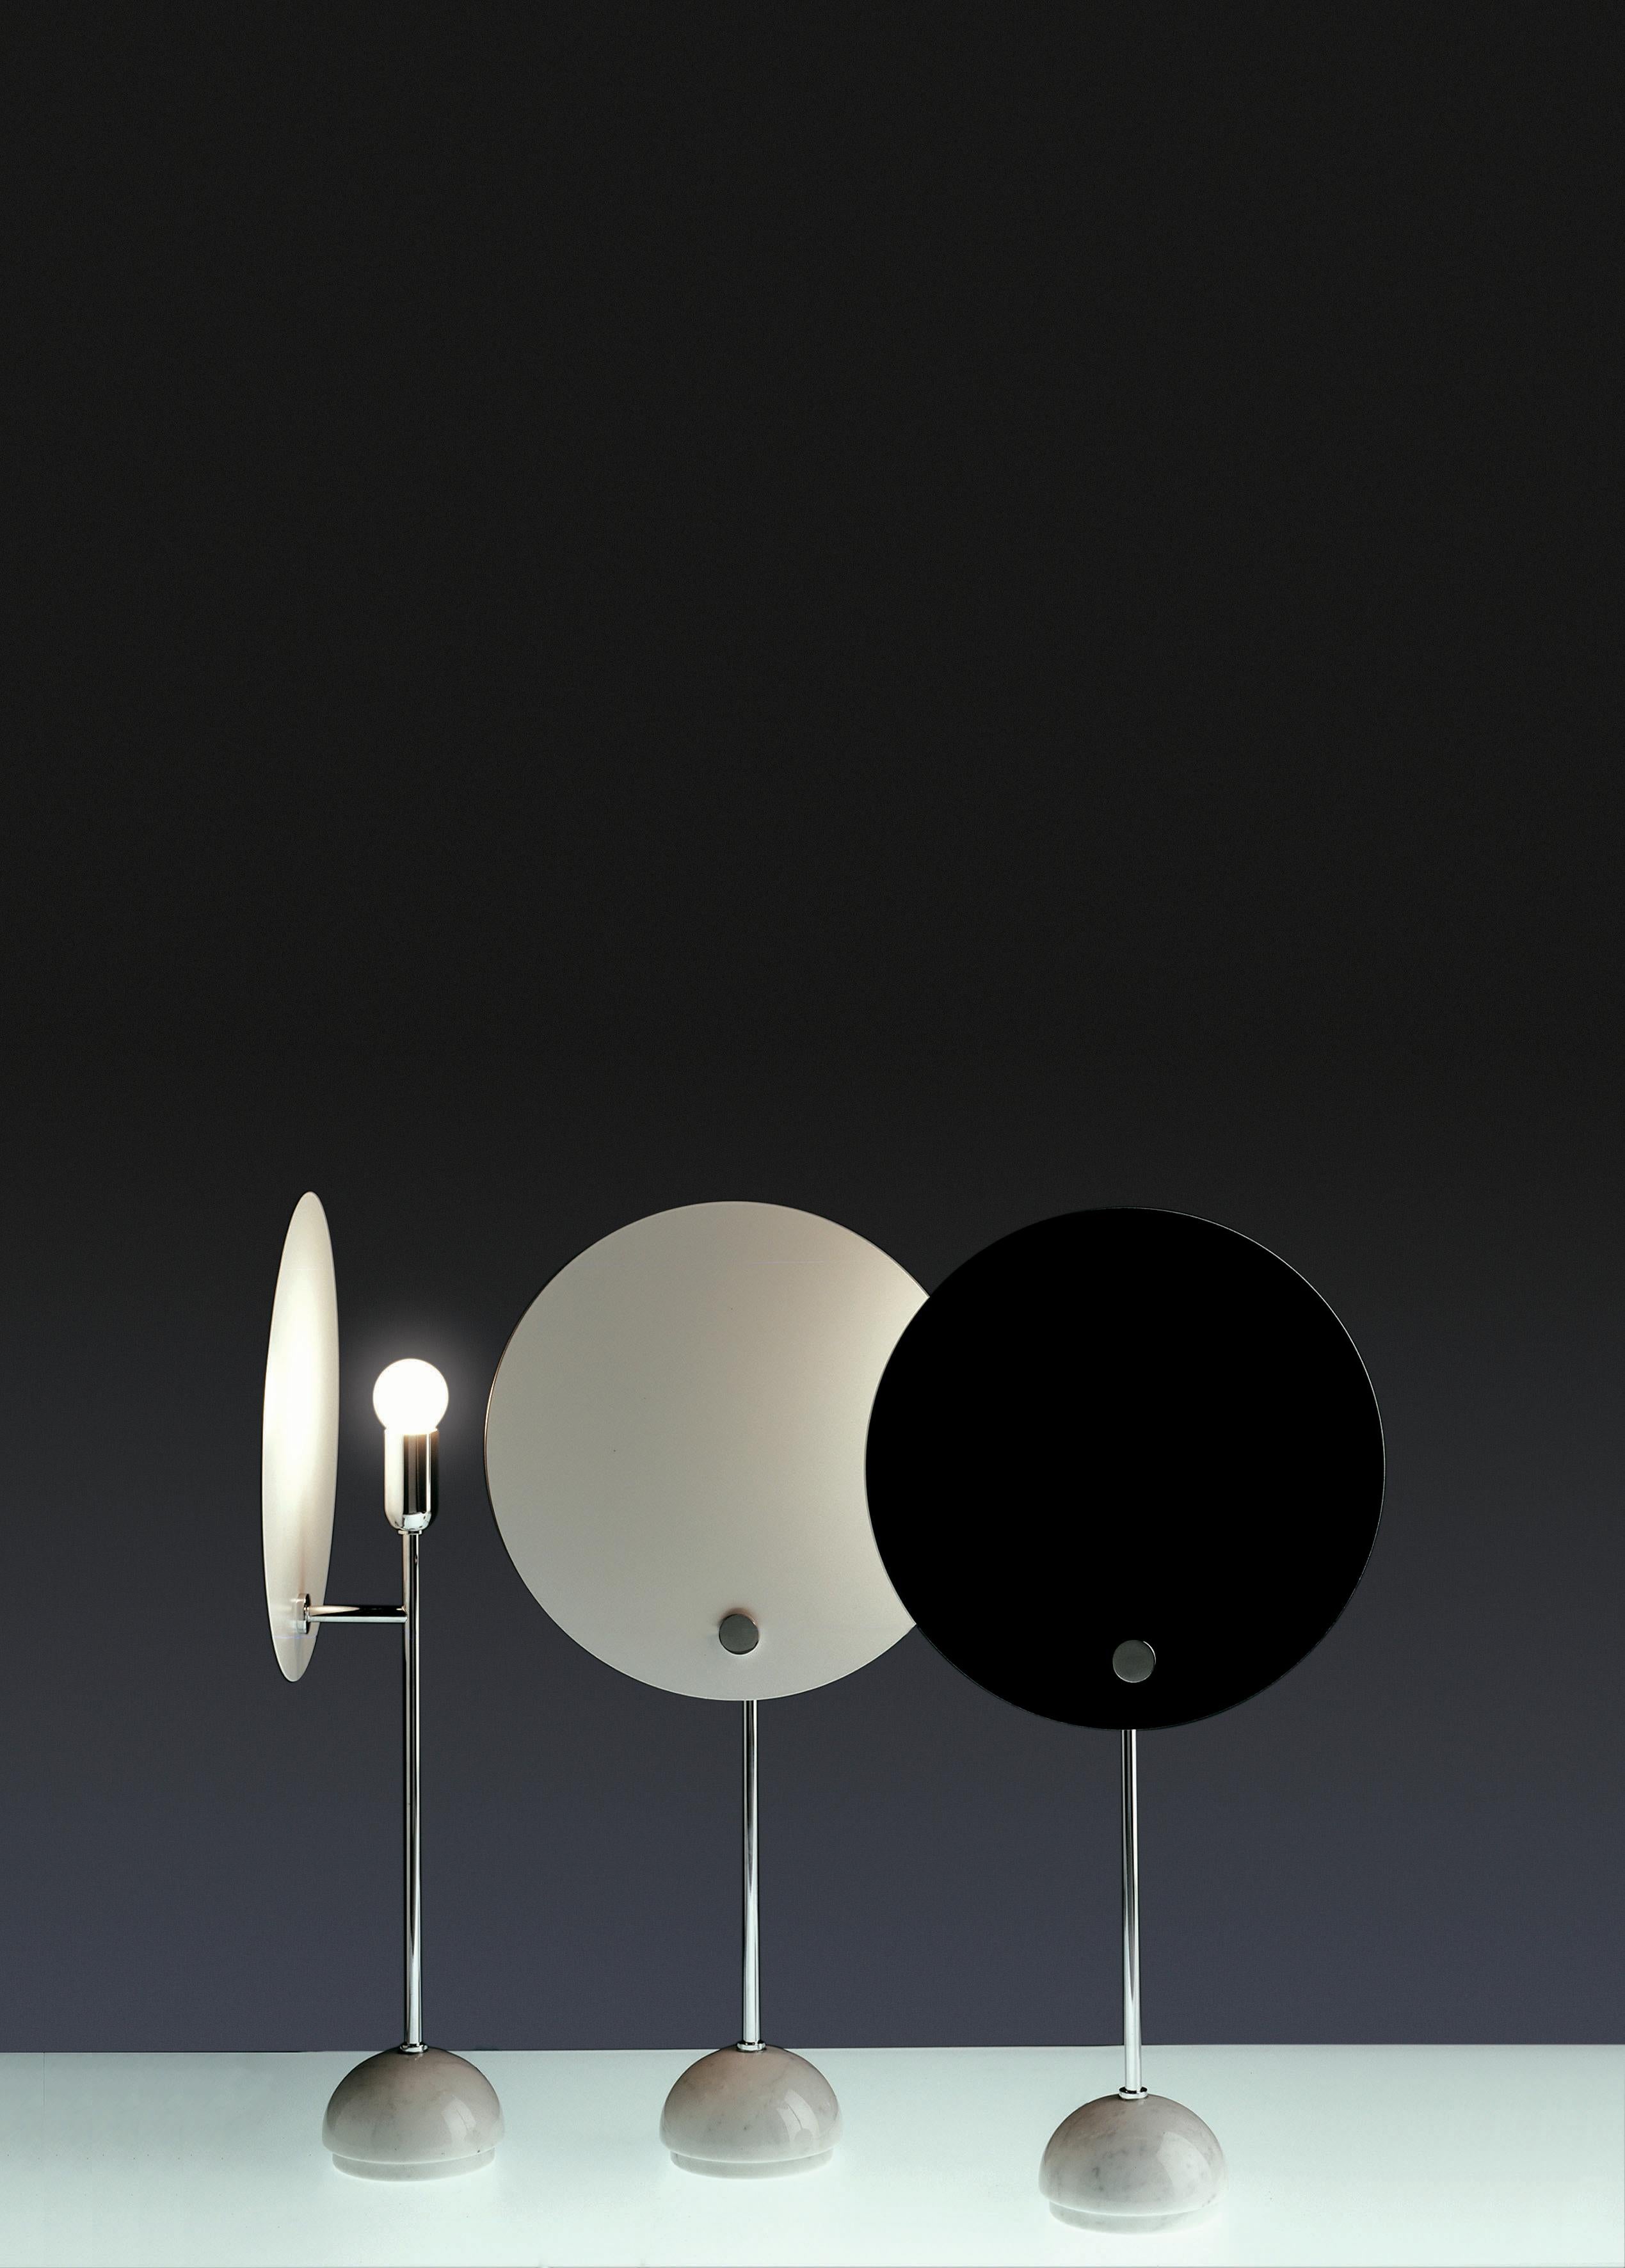 Vico Magistretti 'Kuta' table lamp for Nemo in black.

A table lamp with a circular reflector executed in aluminum, this clever design gives the effect of a solar eclipse. Featuring a circular screen painted white or black with a chromed stem and